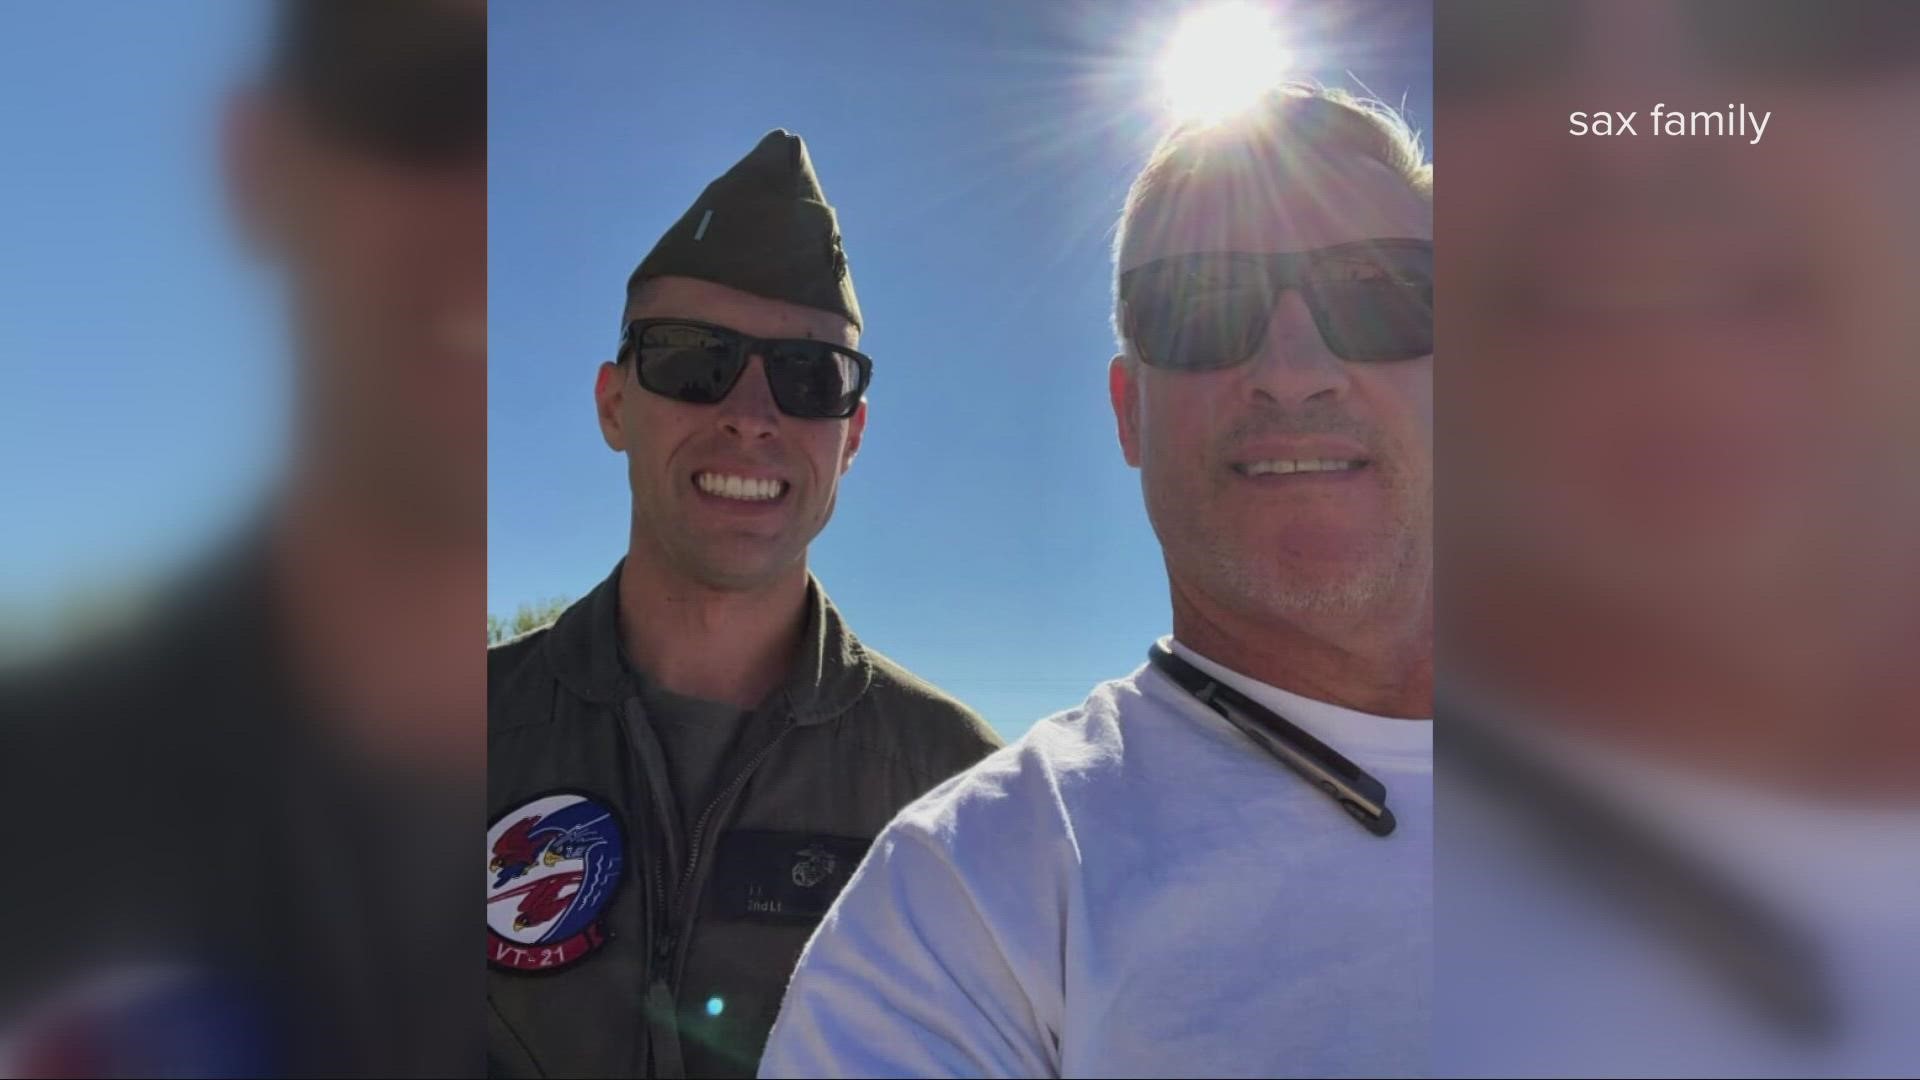 U.S. Marine Captain John Sax, 33 of Placer County, was identified as one of the victims of an Osprey tiltrotor aircraft that crashed in a California desert Wednesday